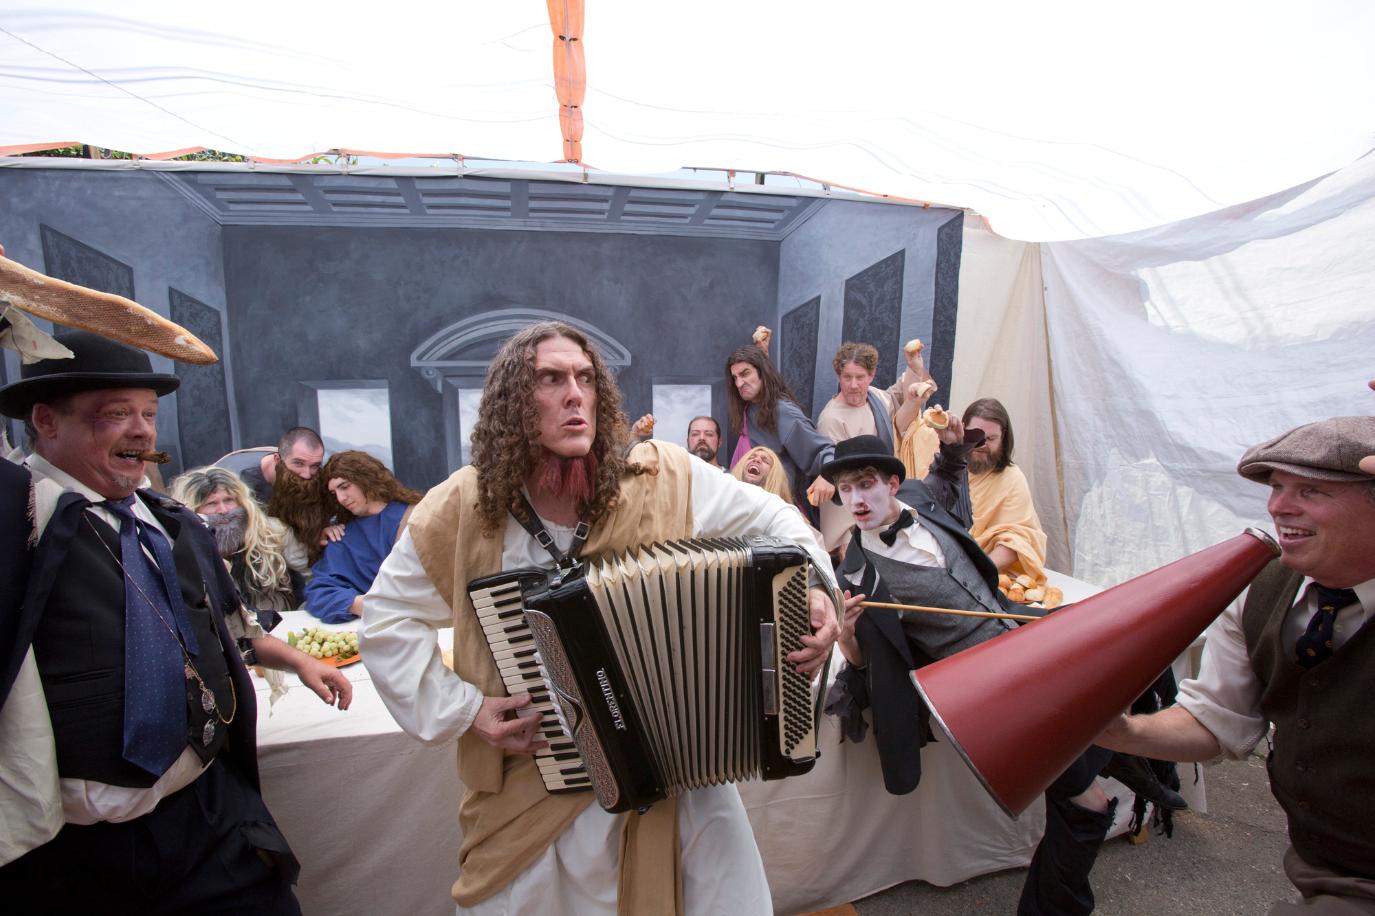 Promo shots with Weird Al Yankovic for The Moving Picture Co. 1914